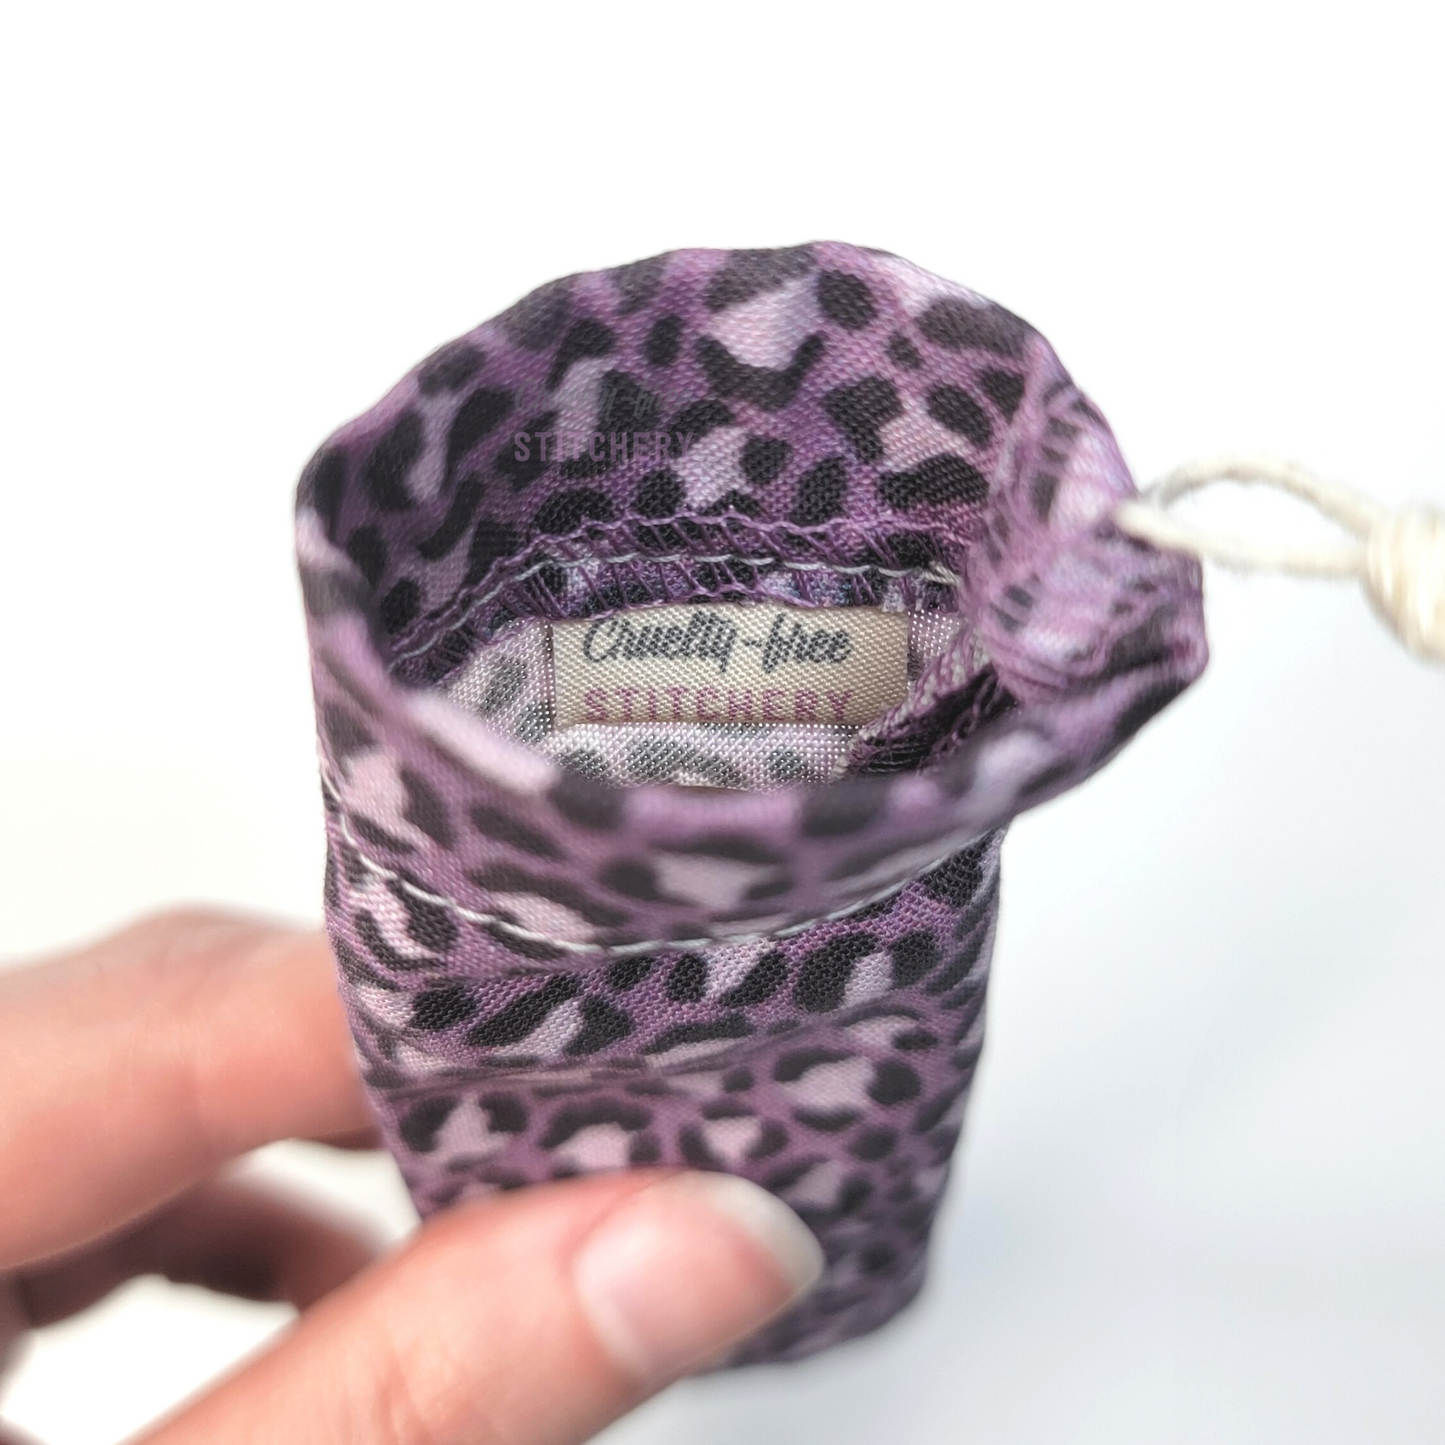 A reusable spork pouch, viewed from the top down. Inside the pouch is a tag with the Cruelty-Free Stitchery logo.